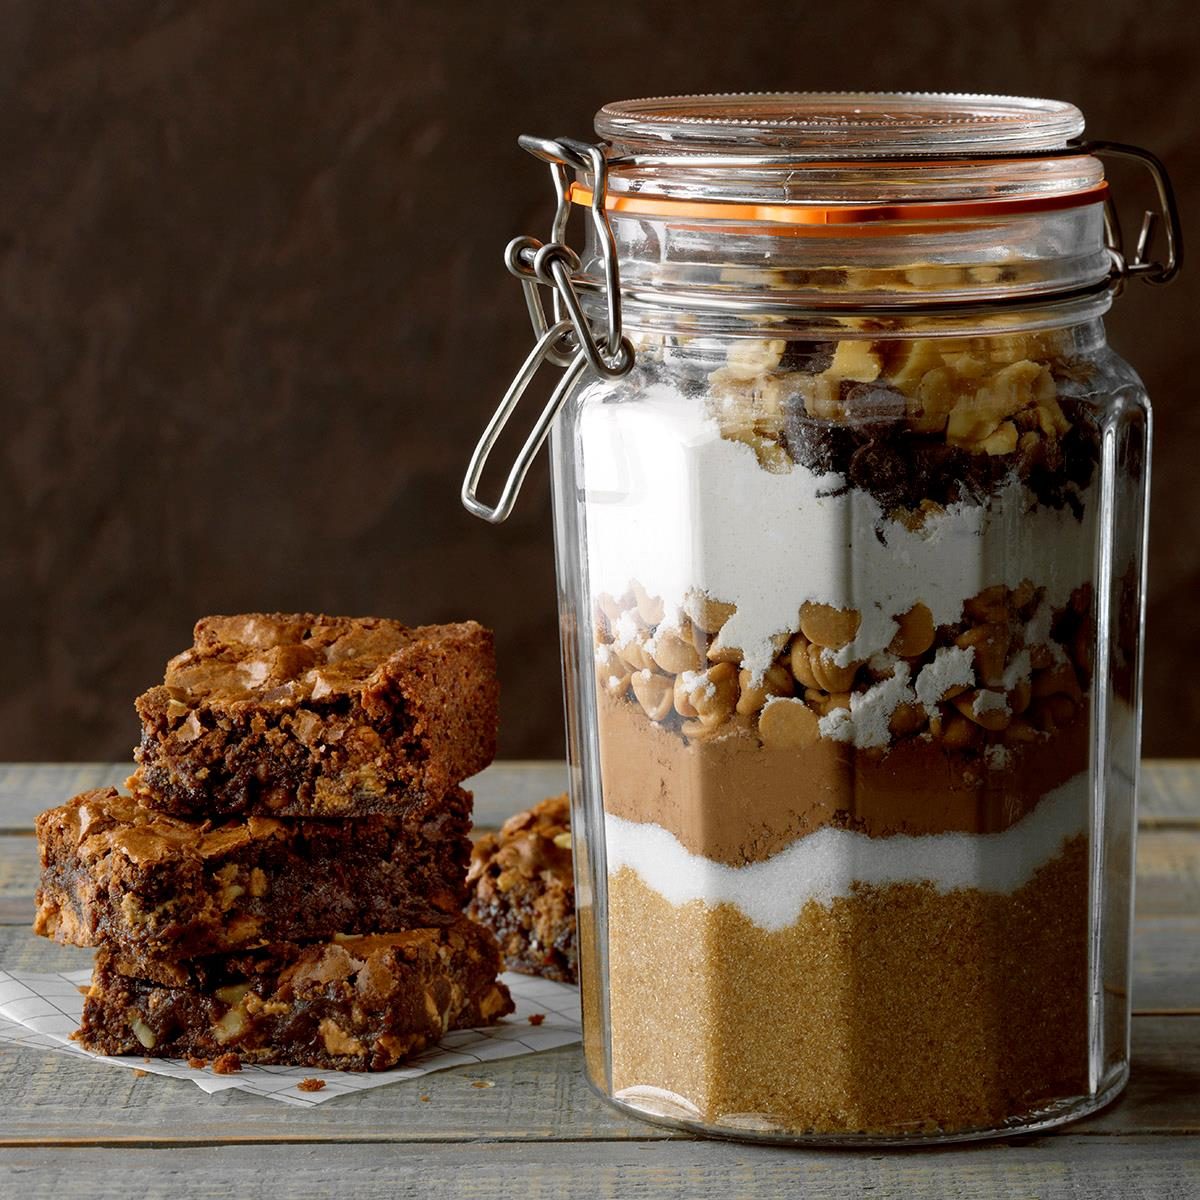 Can You Bake In Mason Jars - You Should Never Cook or Oven-Can